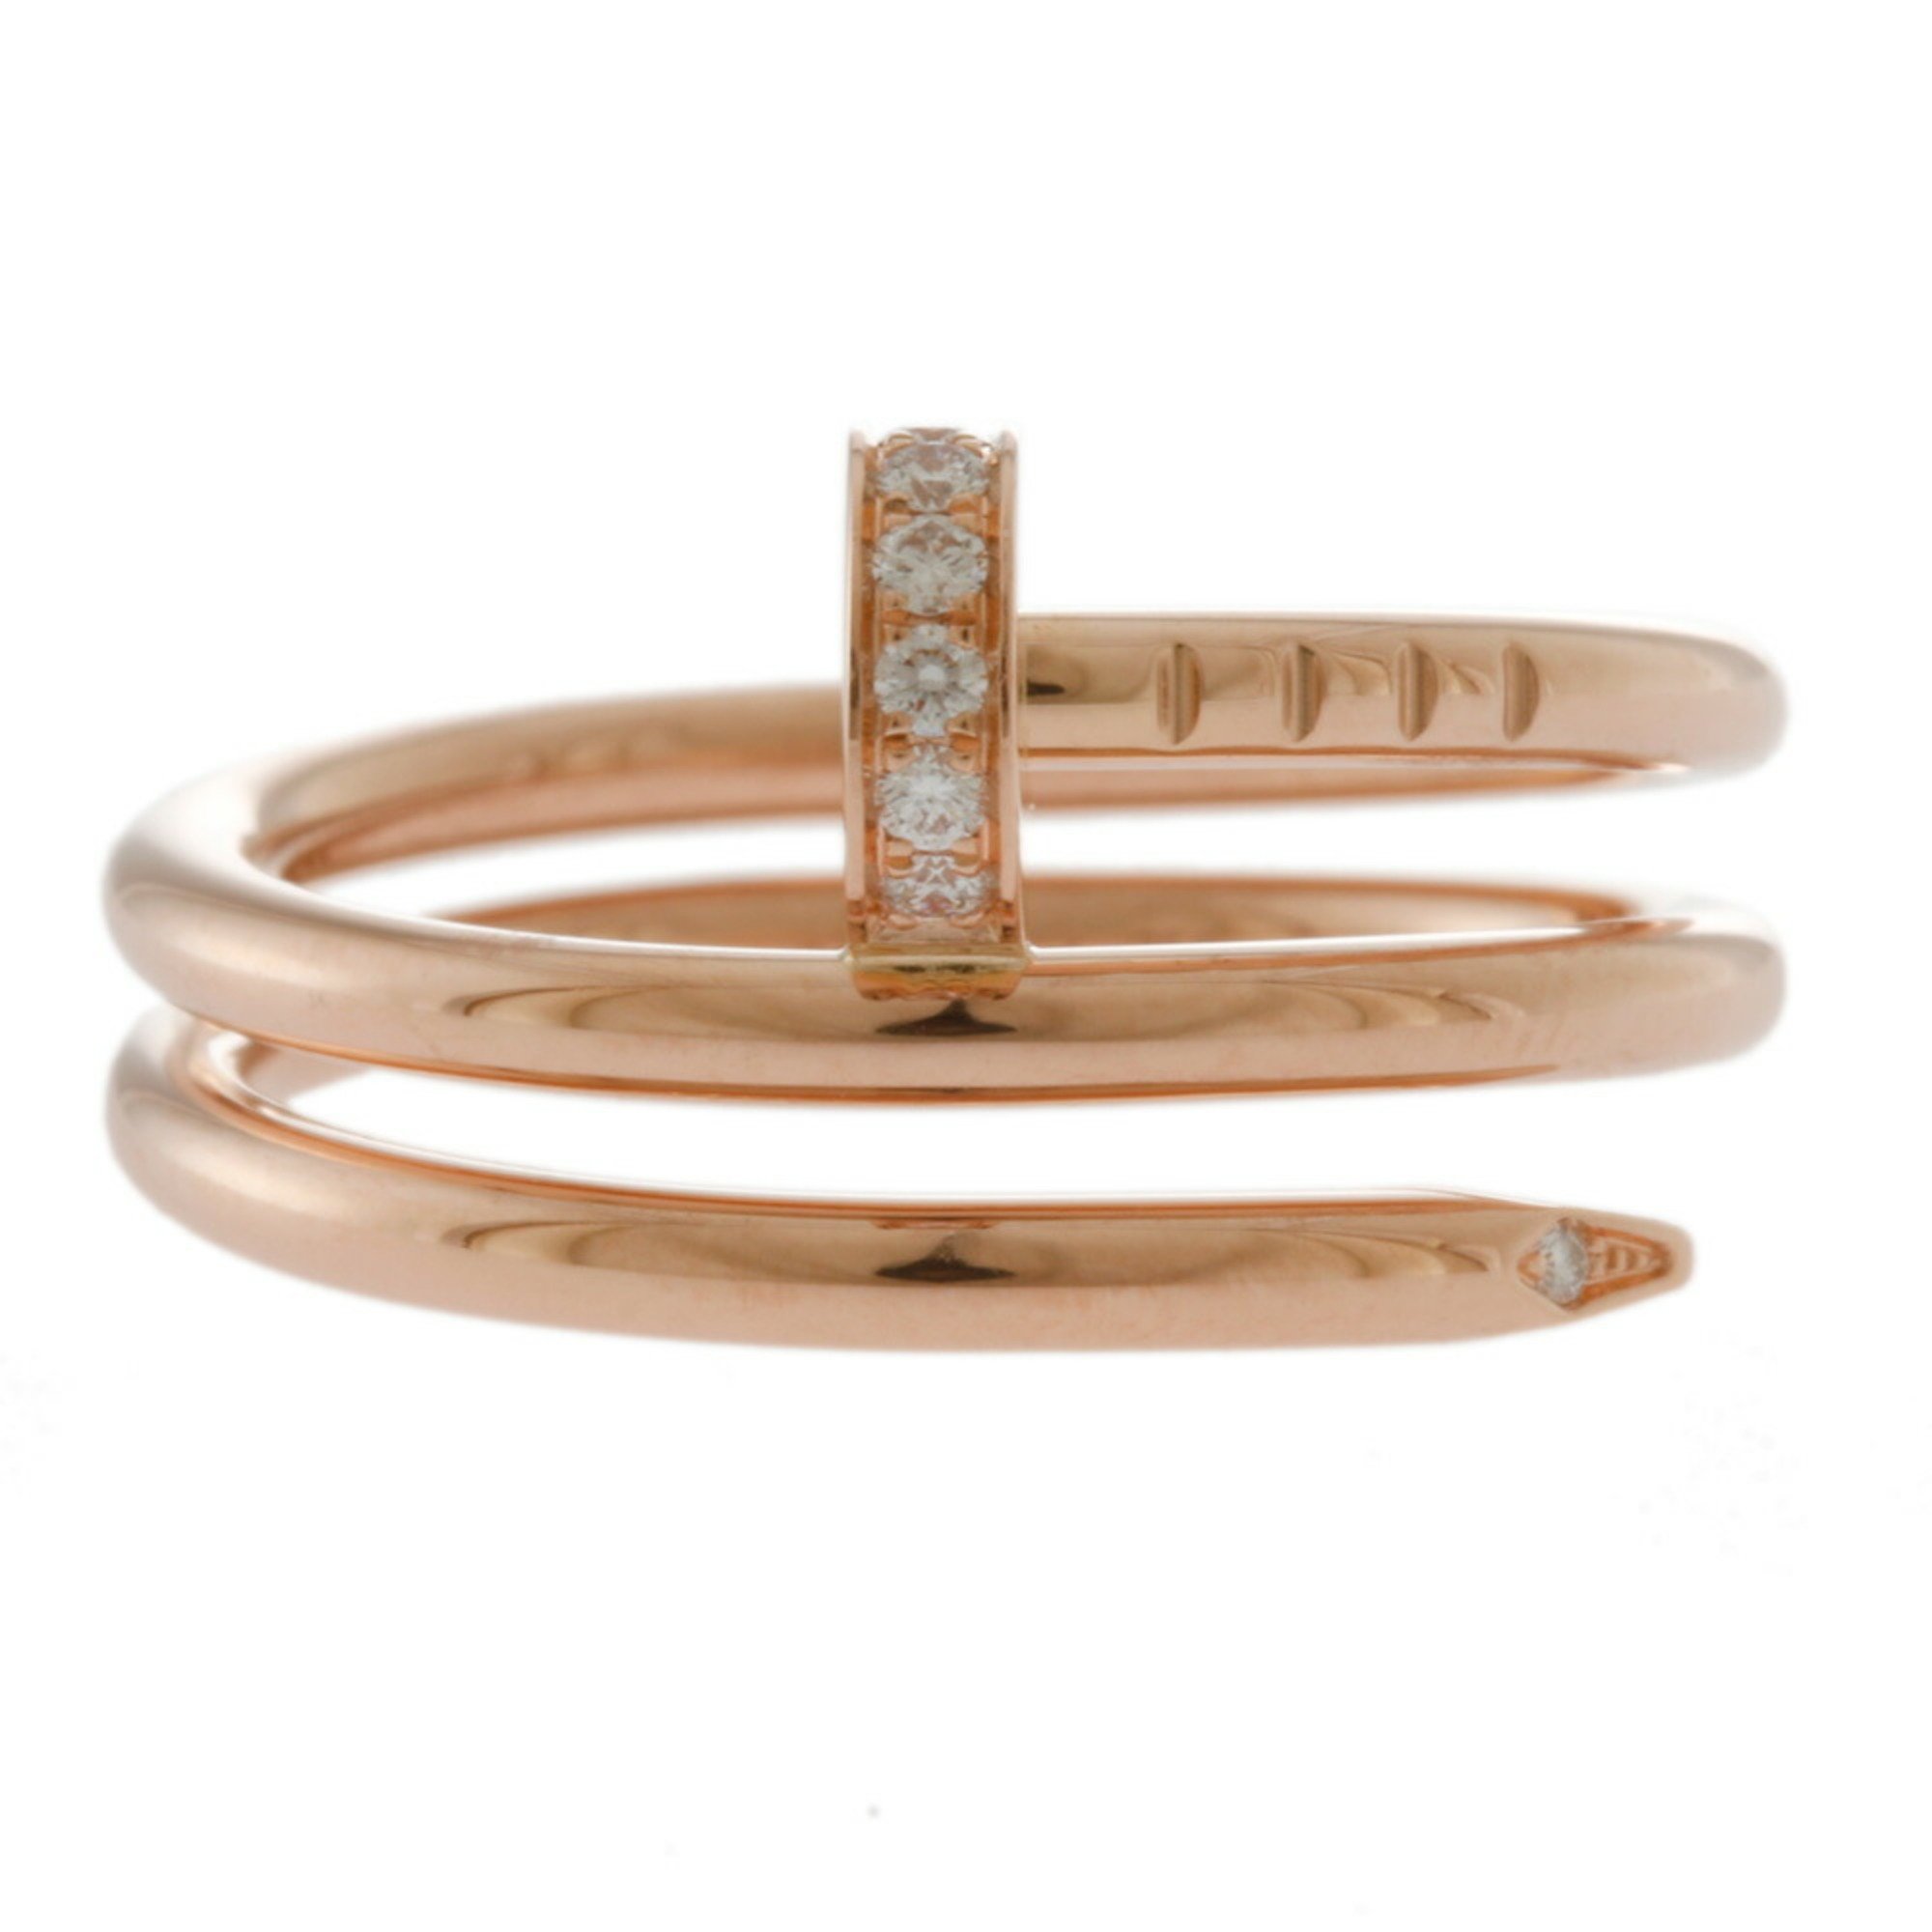 Cartier Just Ankle Diamond Ring No. 7 18K K18 Pink Gold Ladies CARTIER